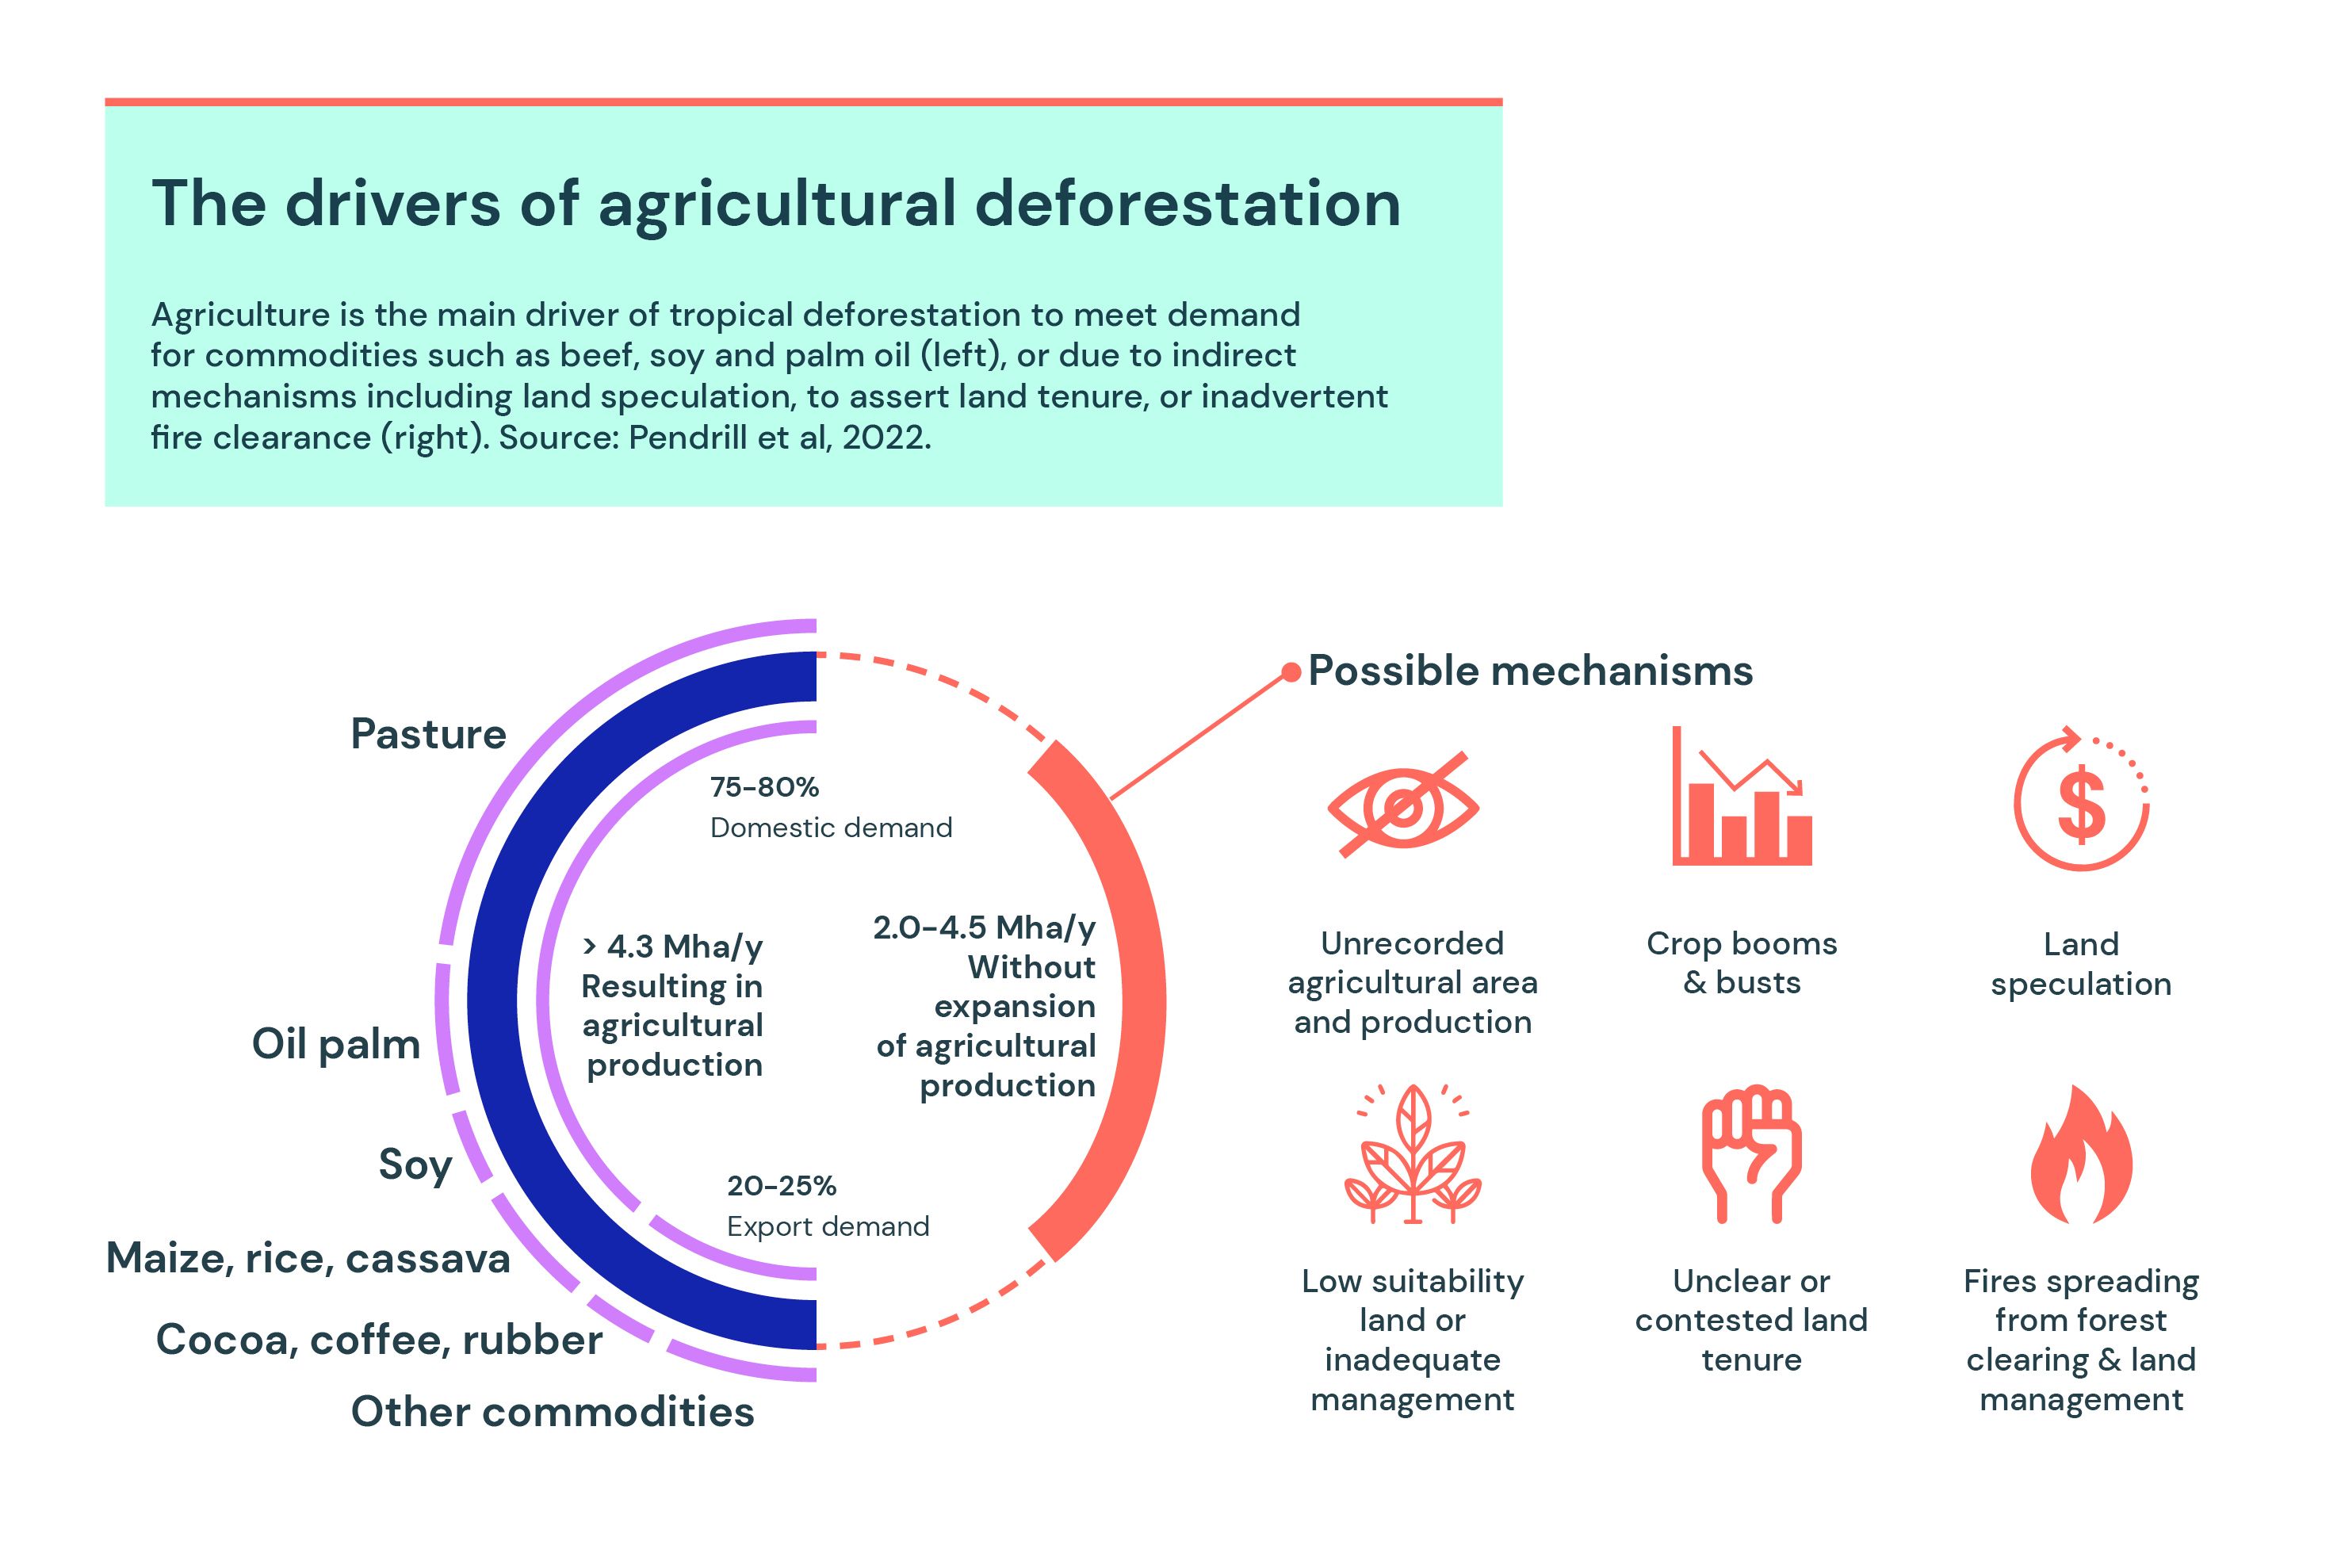 The drivers of agricultural deforestation